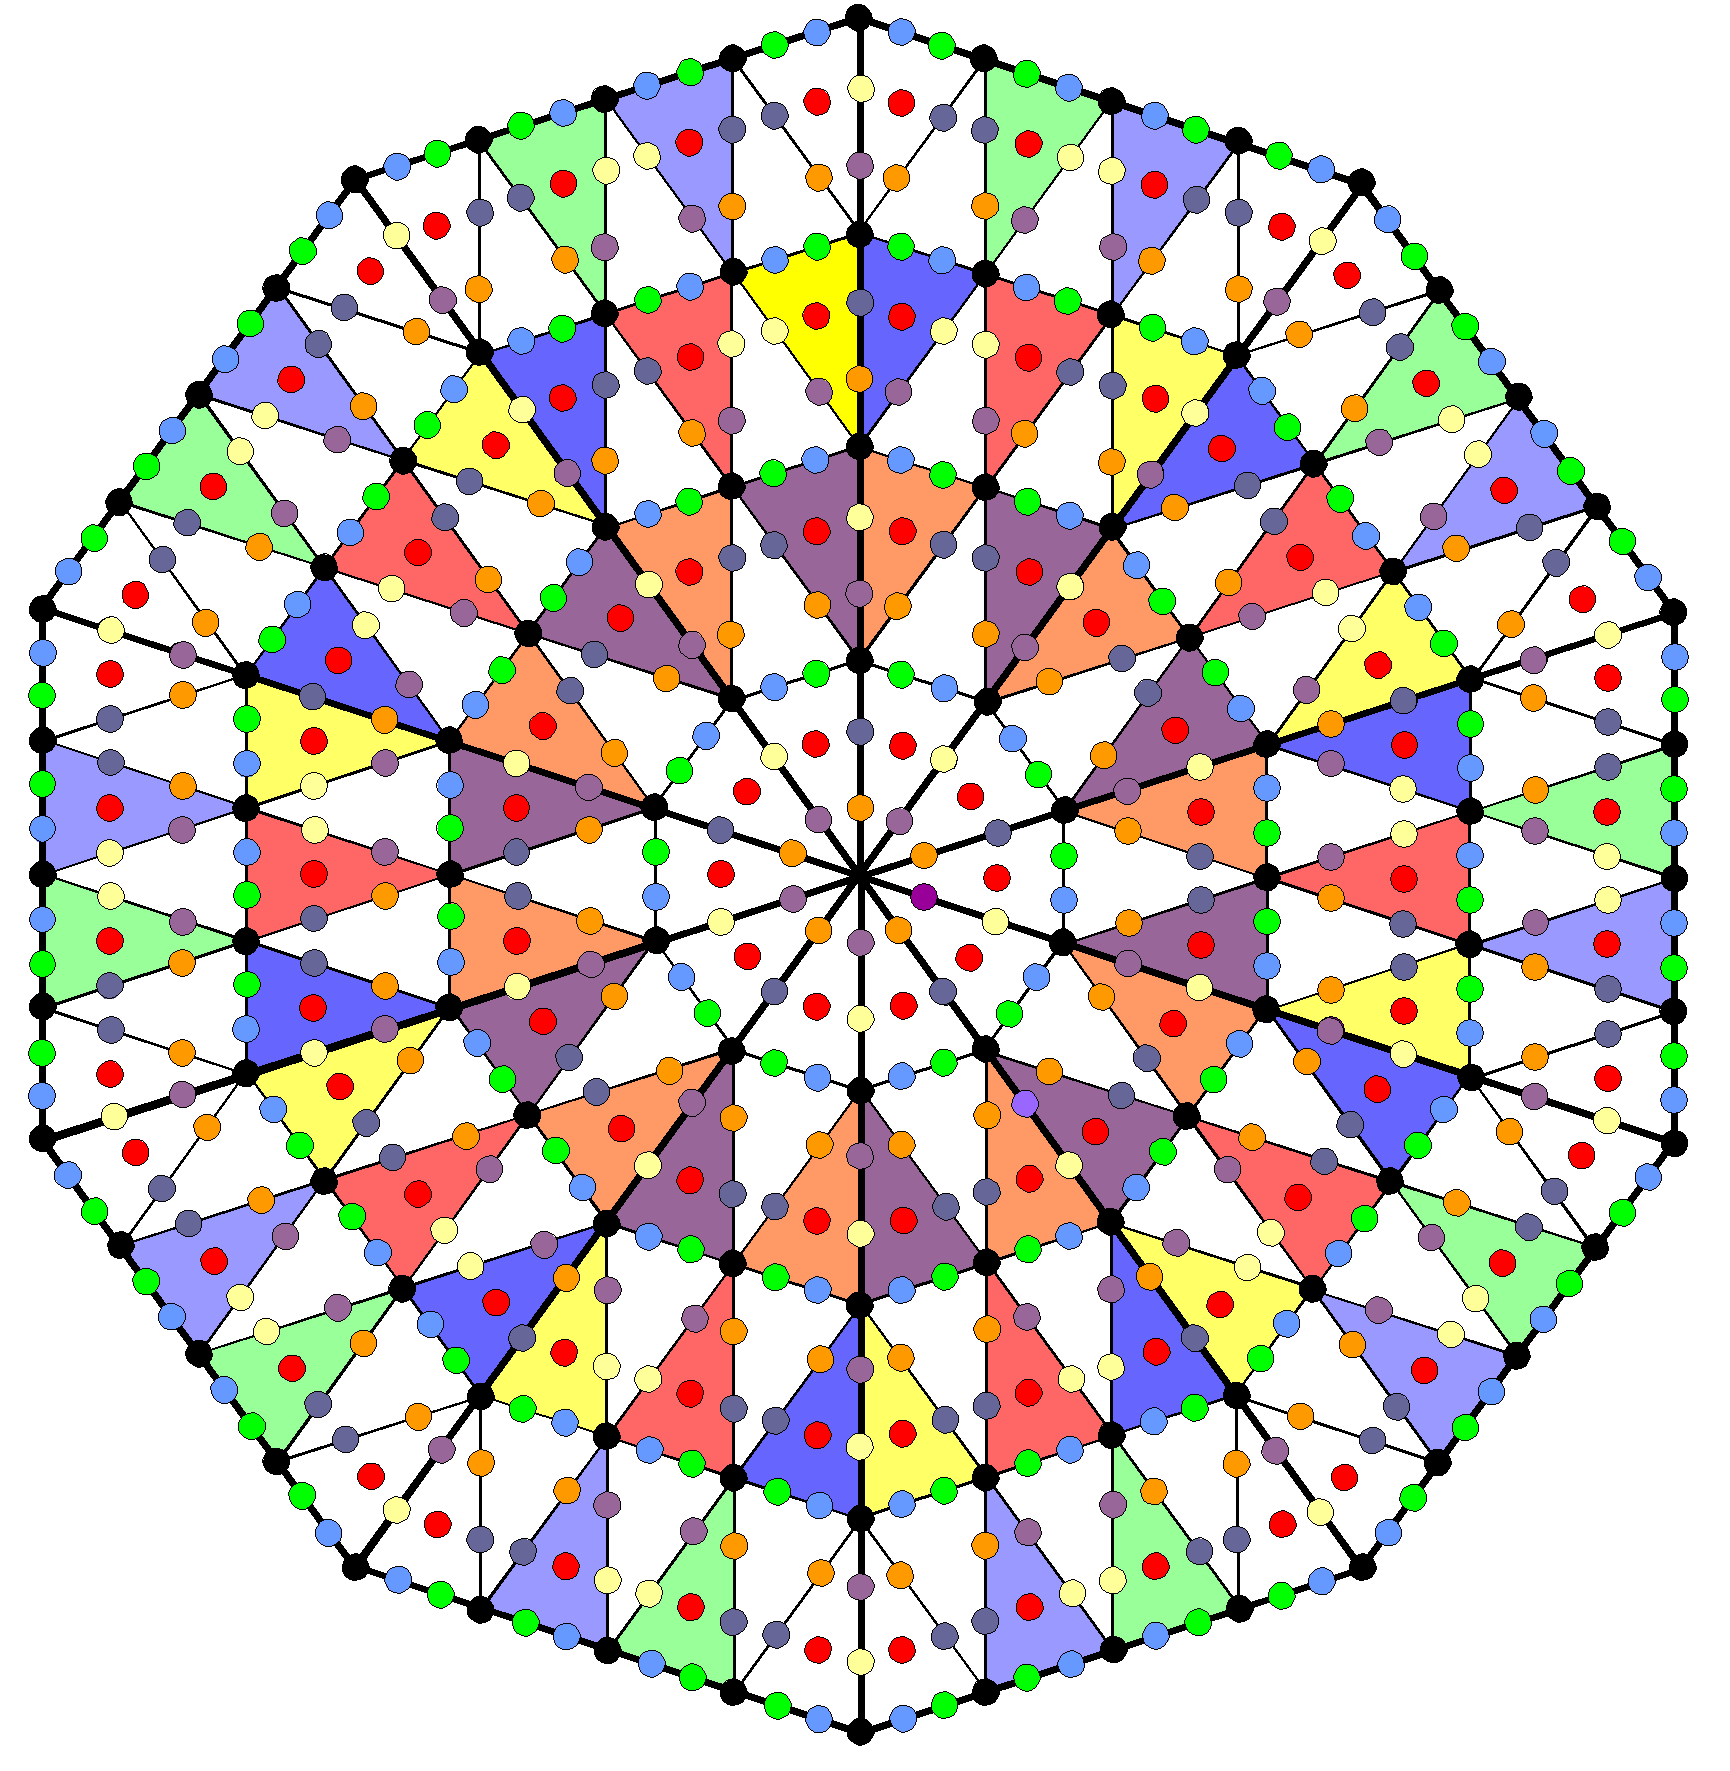 720 yods surround centre of decagon with 2nd-order tetractys sectors